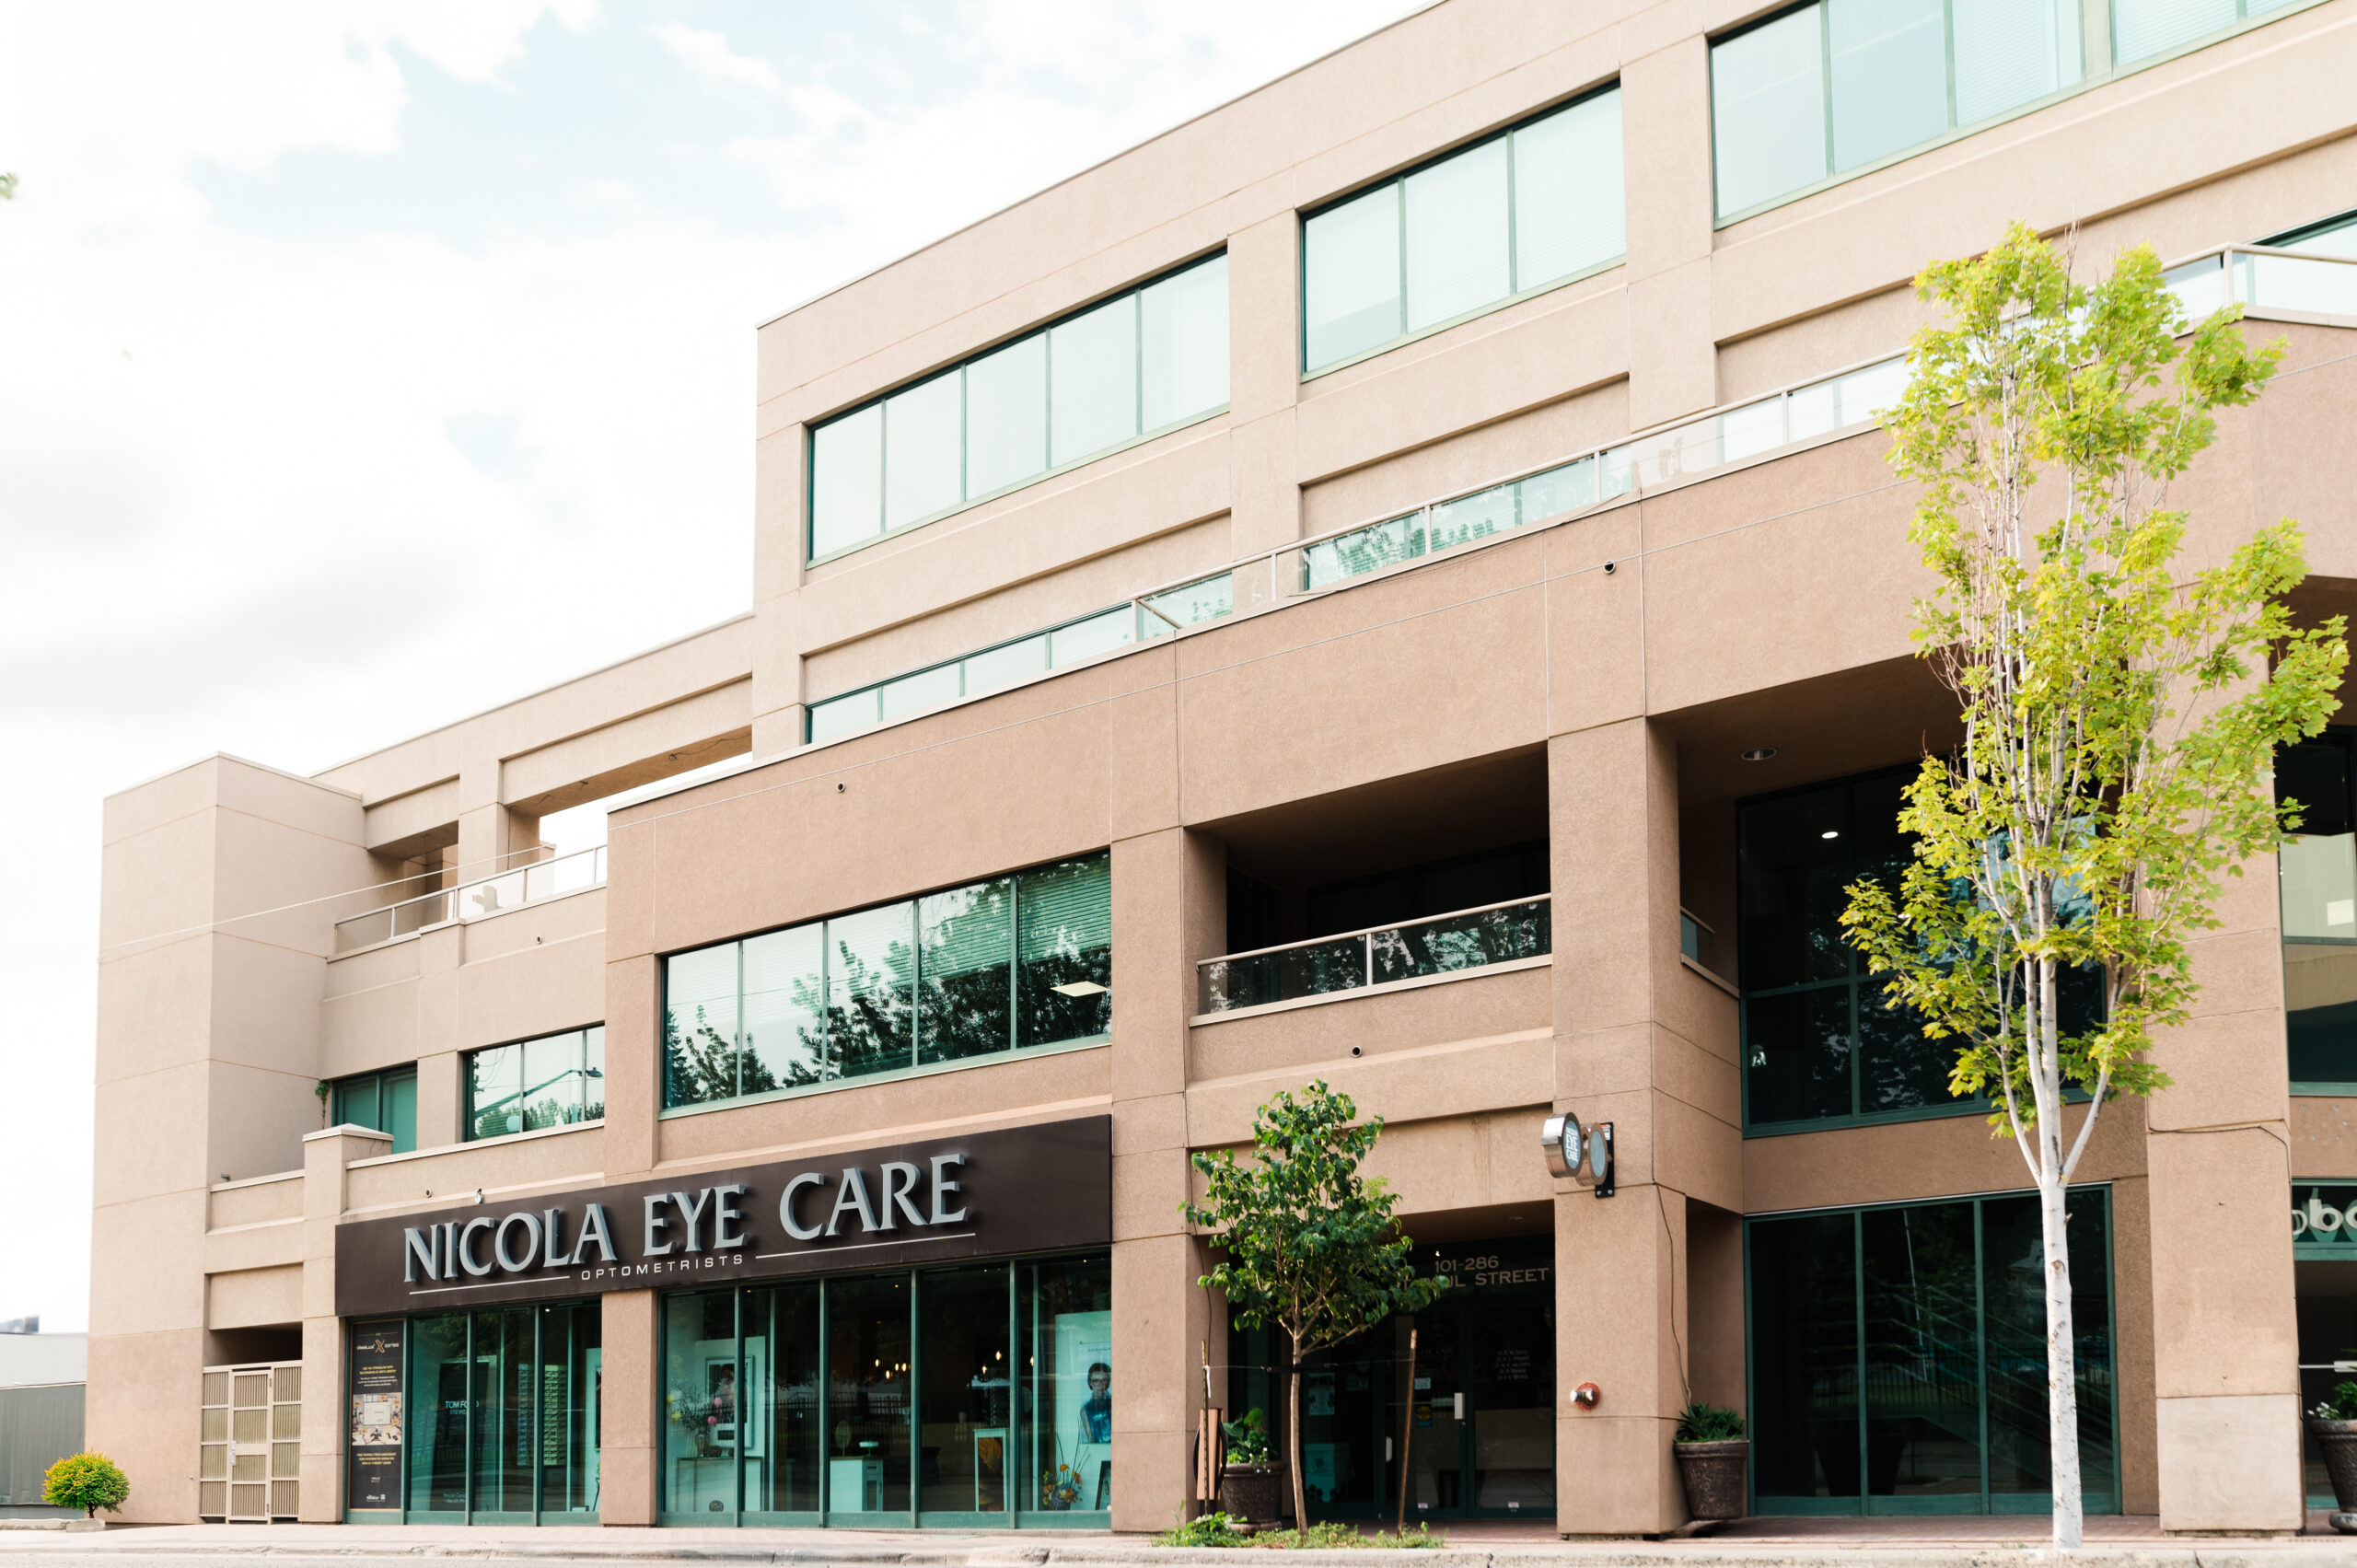 The exterior of Nicola Eye Care in Kamloops offering superior eye care services in the local area